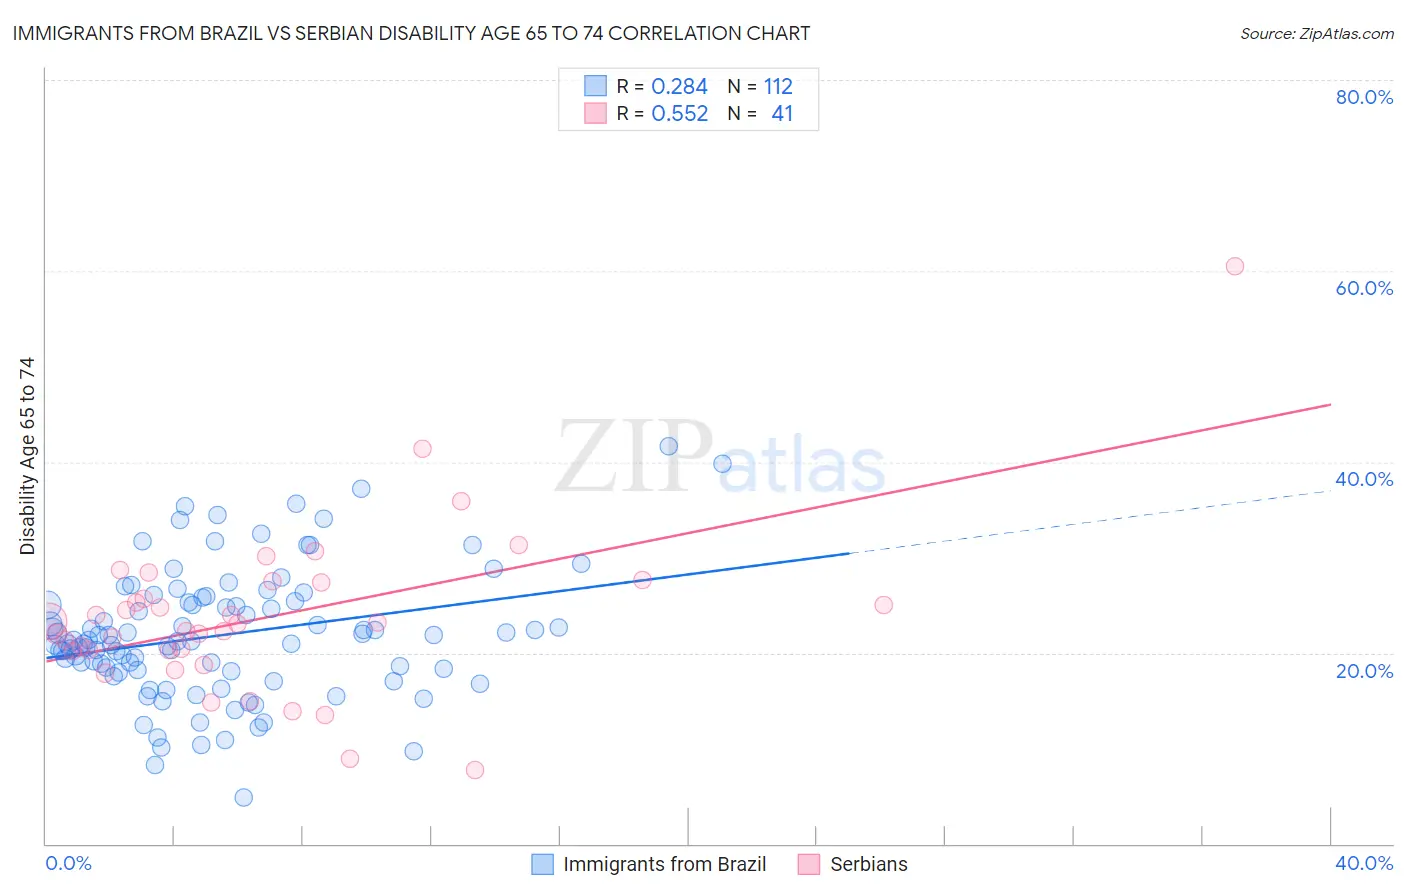 Immigrants from Brazil vs Serbian Disability Age 65 to 74